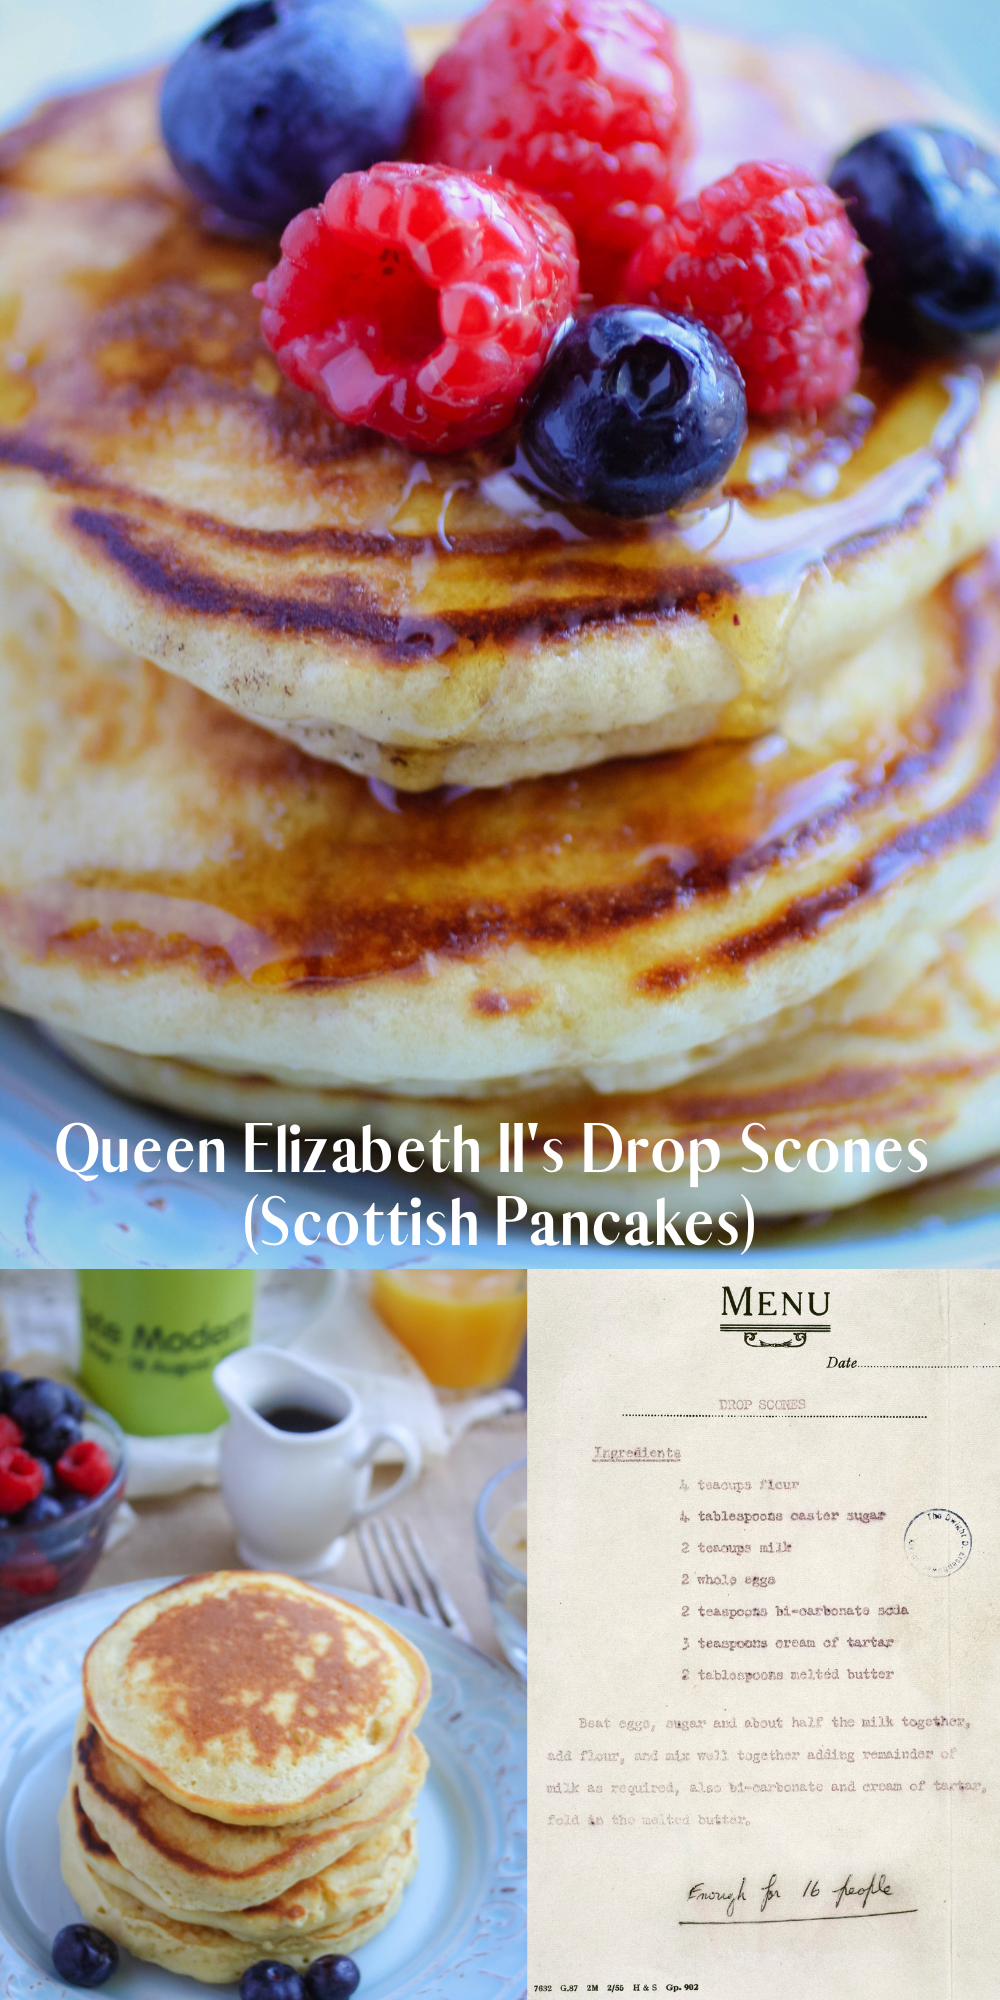 Queen Elizabeth II’s Drop Scones (Scottish Pancakes) served on the breakfast table with fruit and coffee and juice.